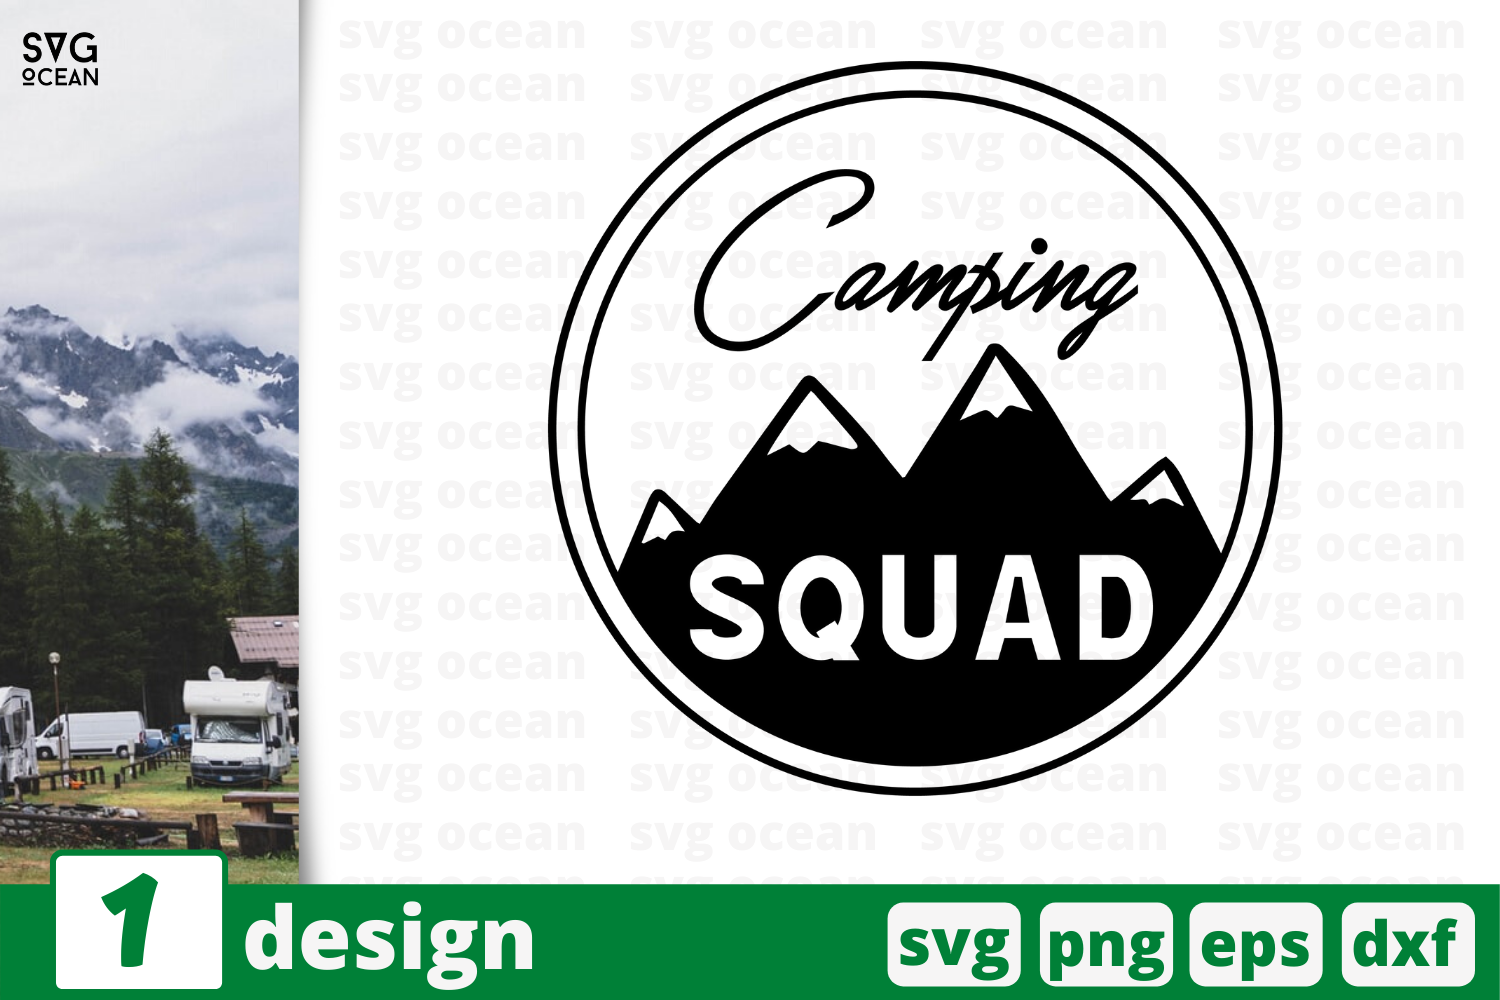 Download 1 Camping Squad Svg Bundle Quotes Cricut Svg By Svgocean Thehungryjpeg Com